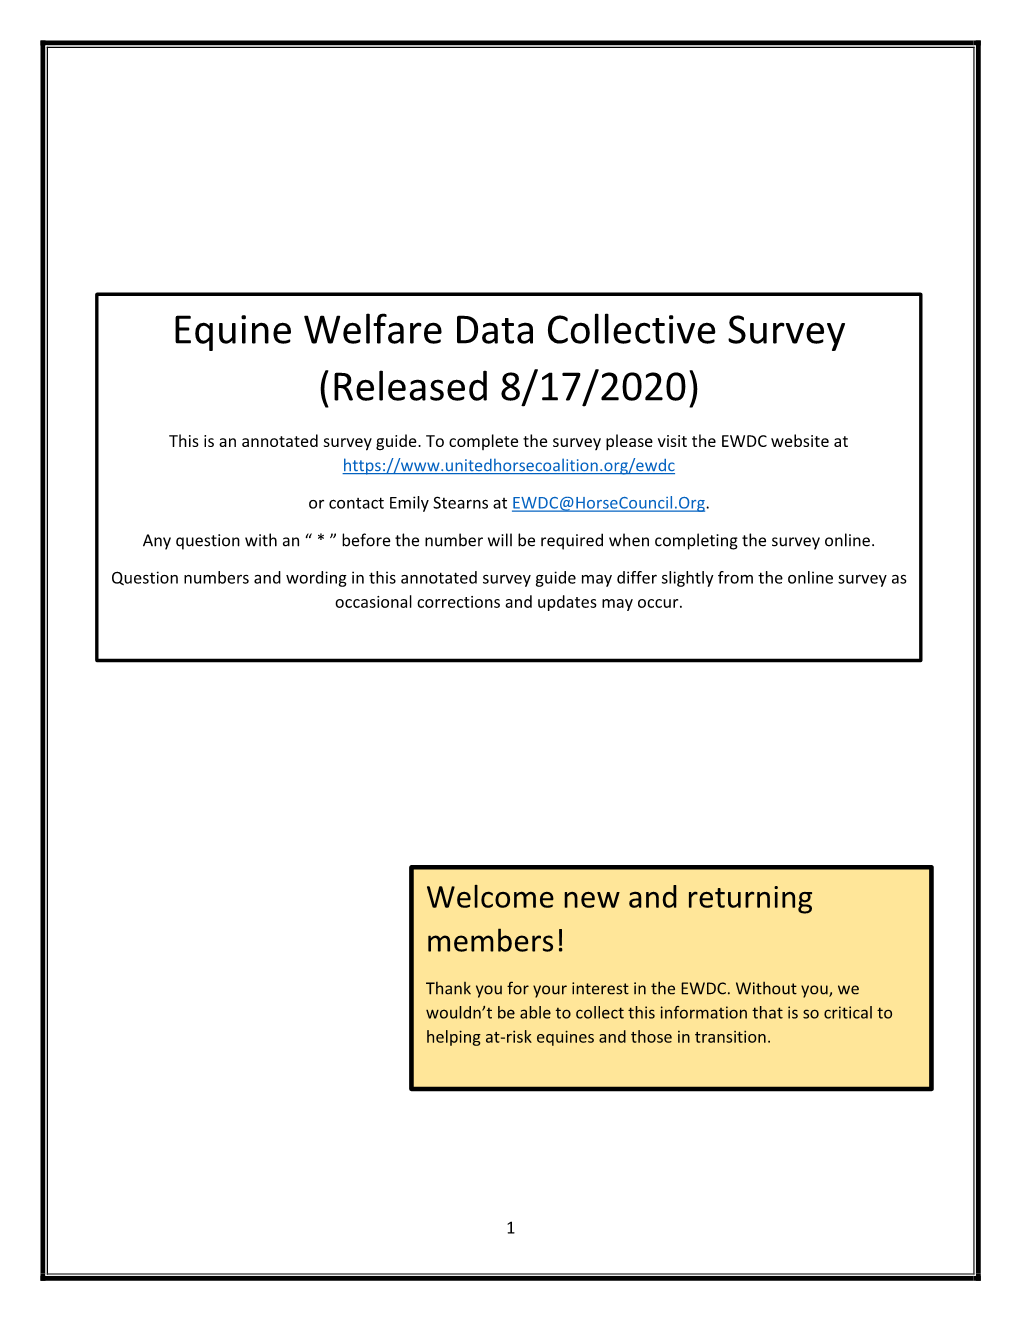 Equine Welfare Data Collective Survey (Released 8/17/2020)